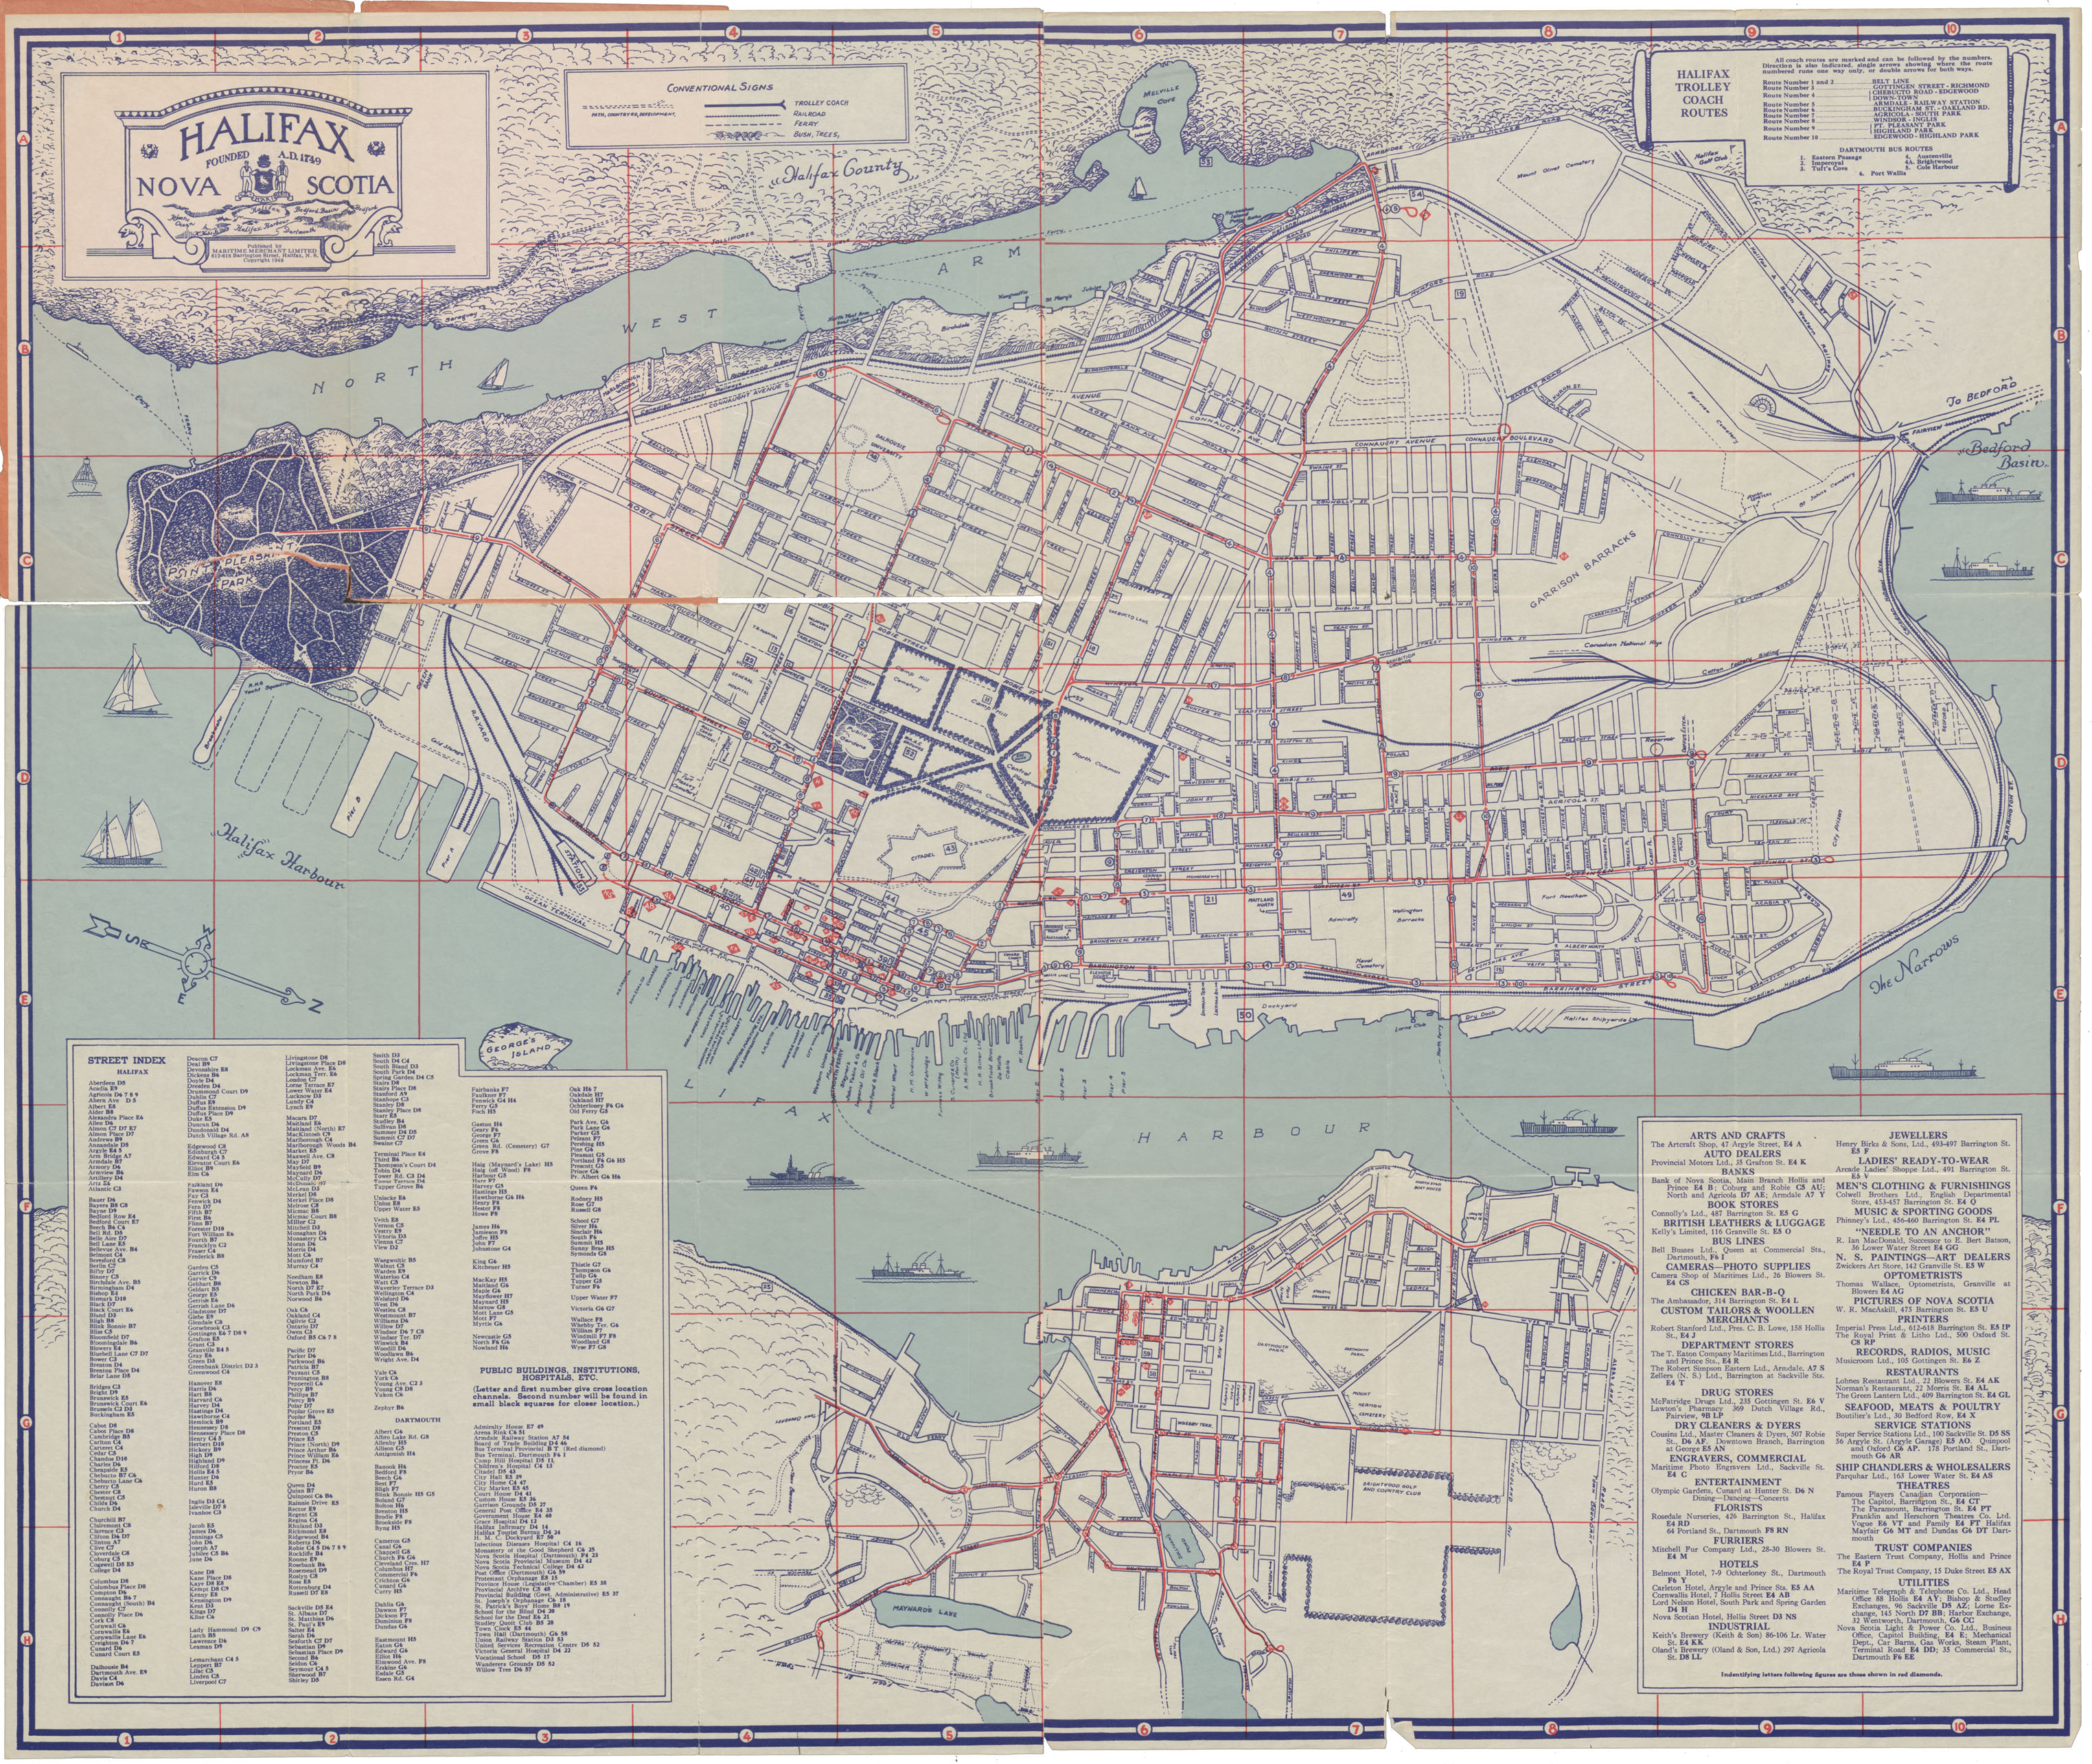 The Only Authentic Map of the City of Halifax and Town of Dartmouth, NS